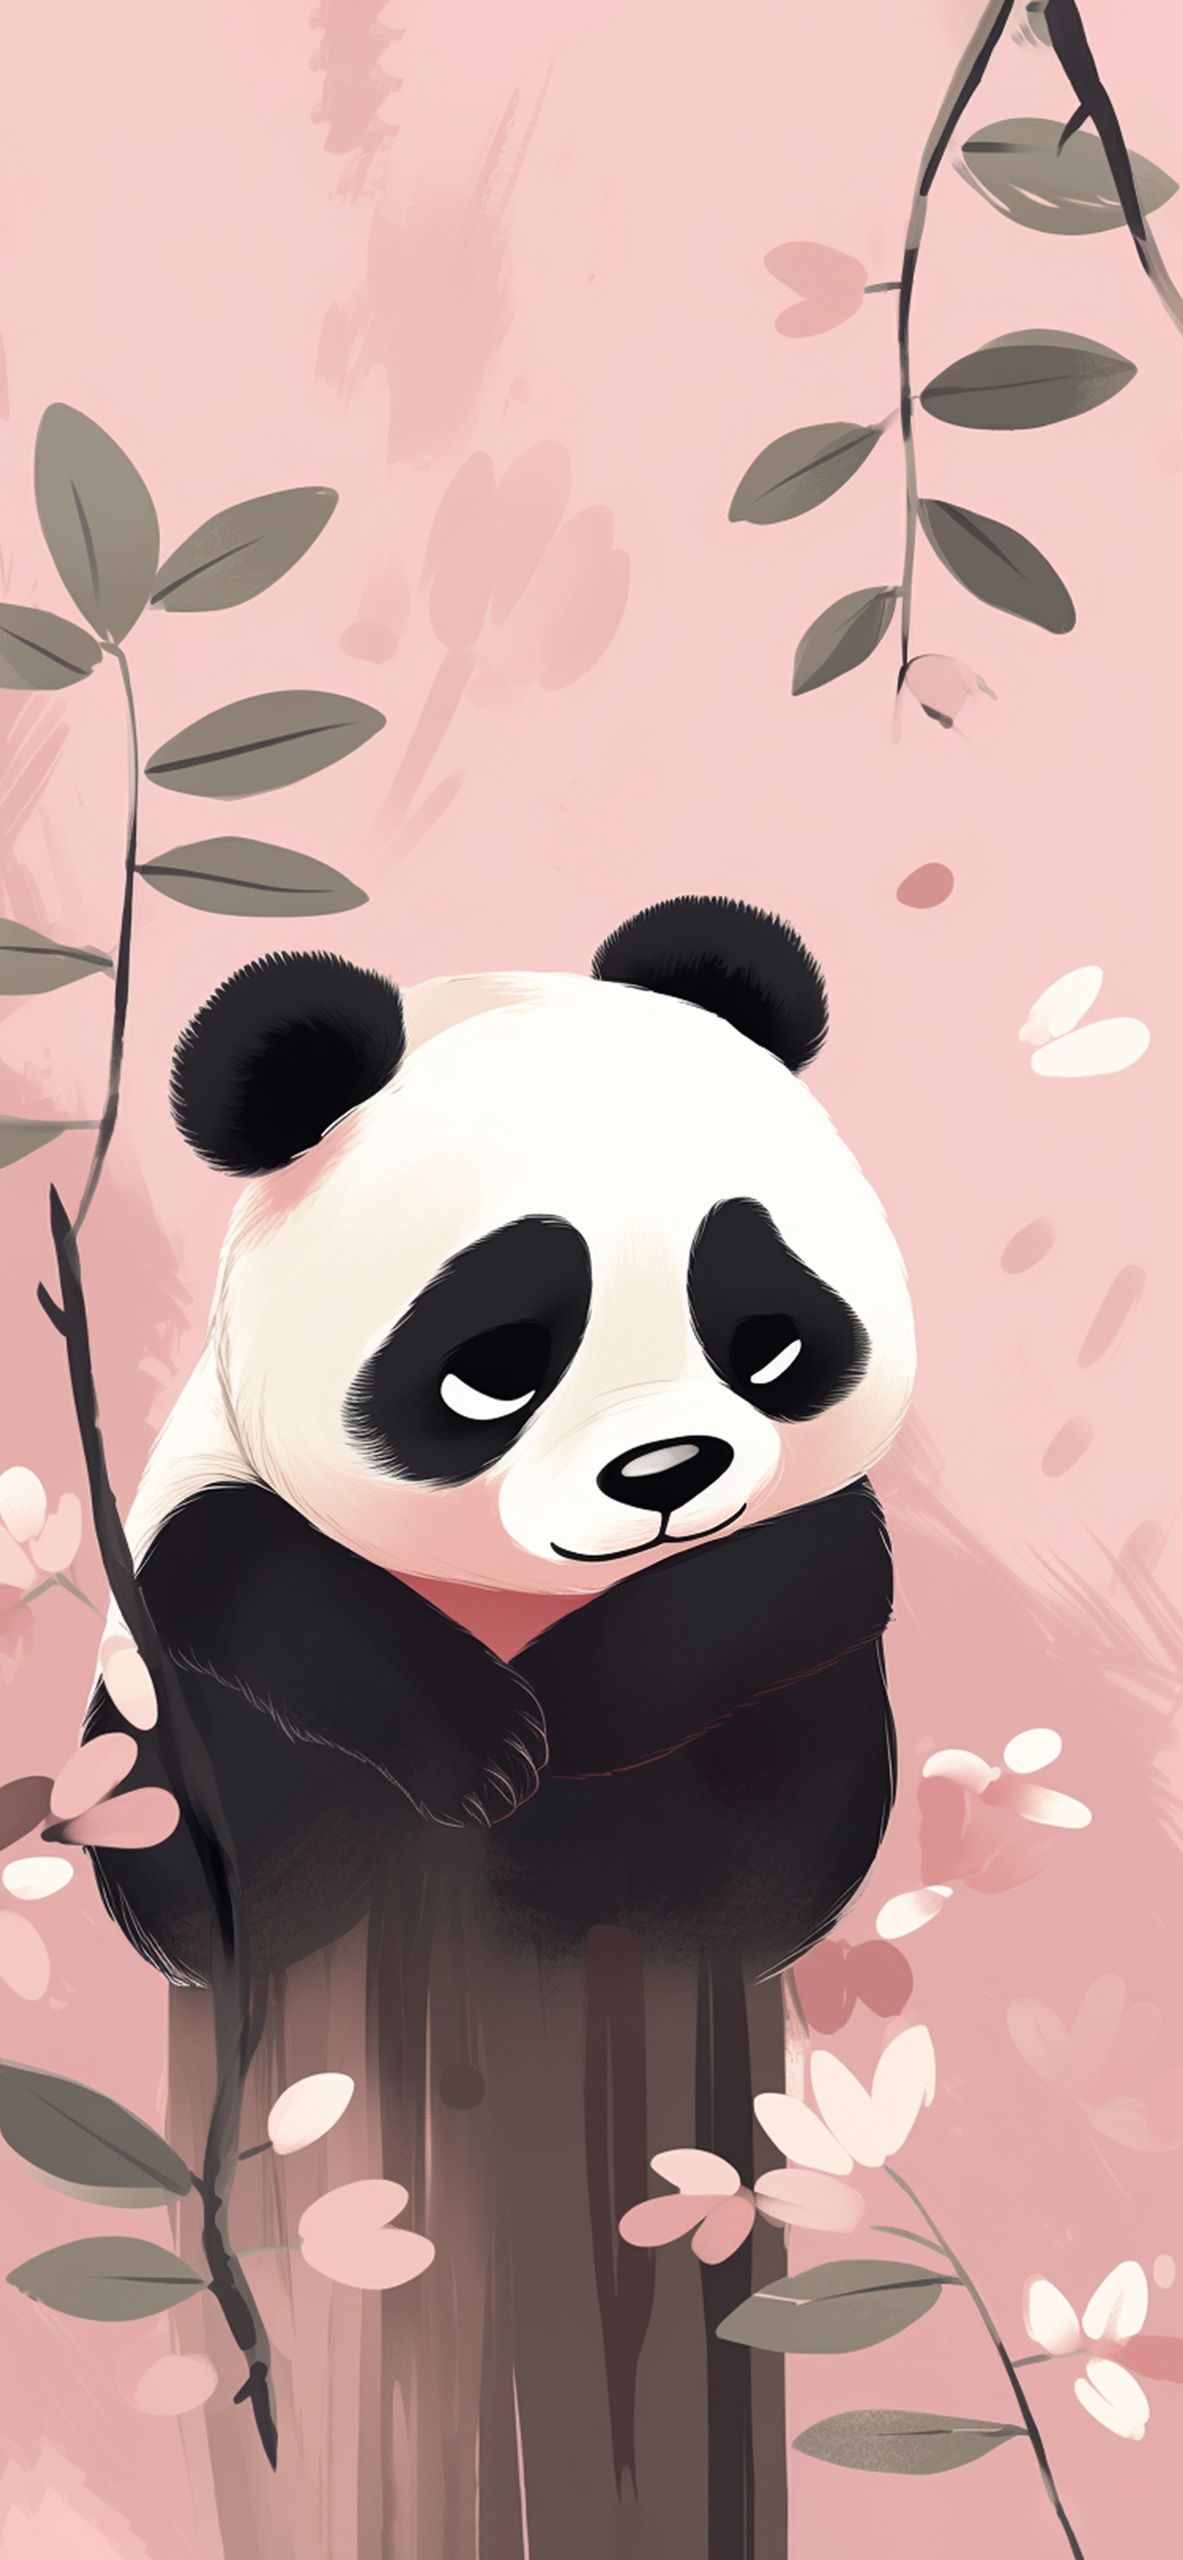 A panda bear sitting on a tree branch surrounded by leaves and flowers - Panda